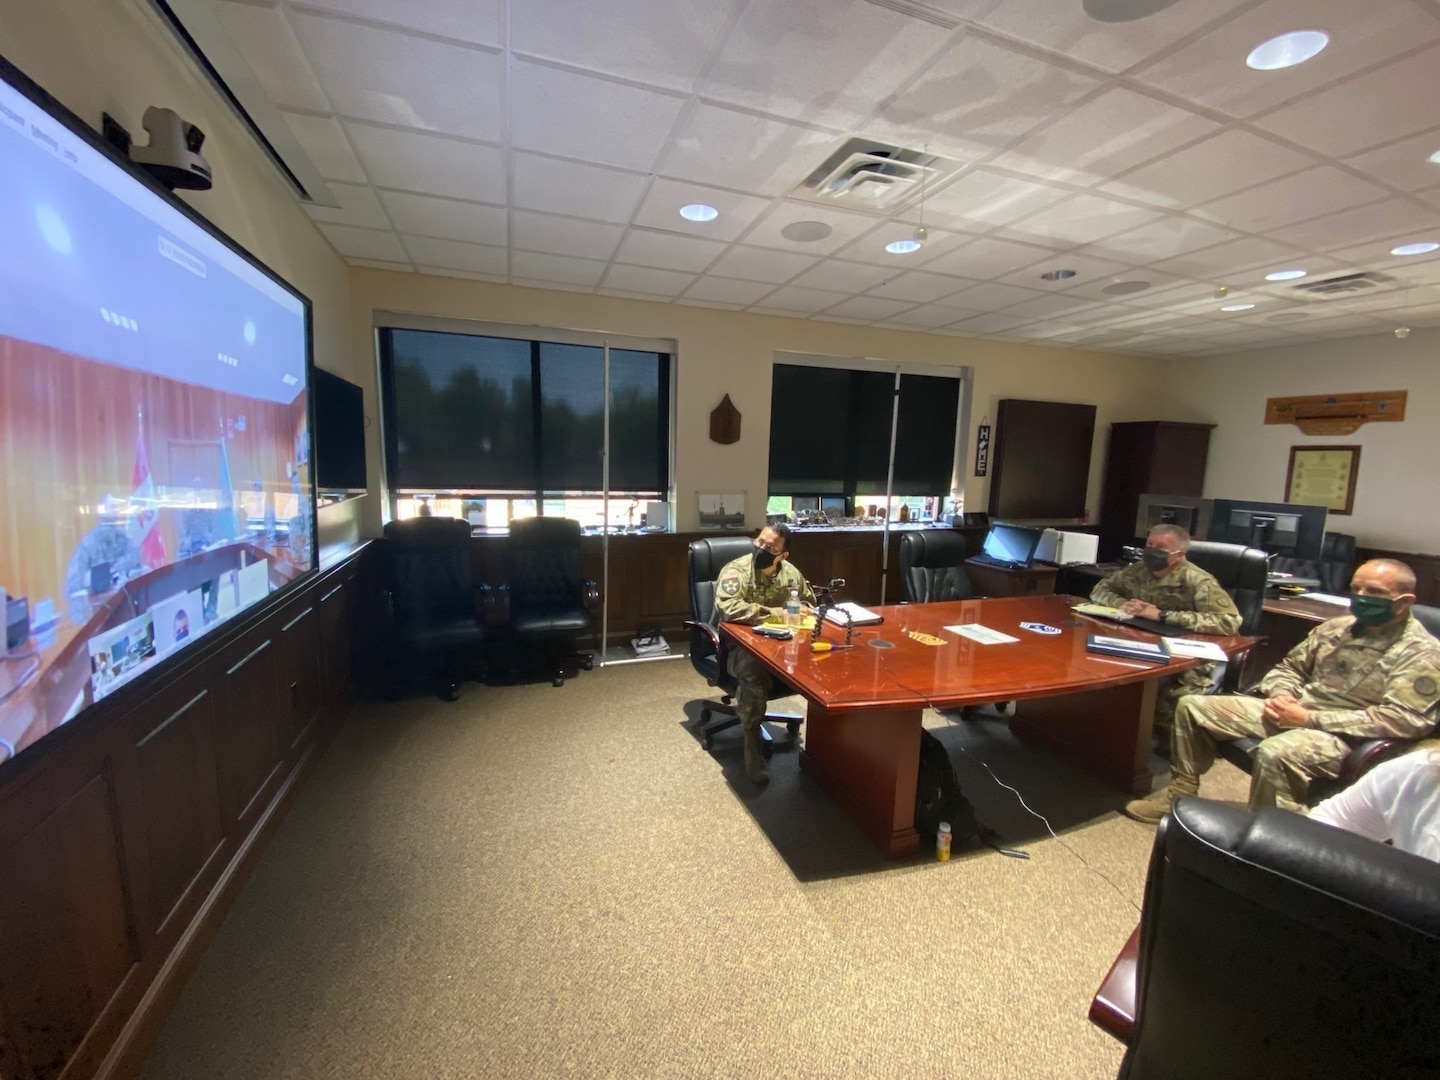 West Virginia National Guard Adjutant General, Maj. Gen. James Hoyer, alongside the Senior Enlisted Leader, Command Sgt. Maj. Phillip Cantrell participated in a video teleconference with the Peruvian Air Force's commanding general, Rodolfo Garcia and staff July 21, 2020, at the WVNG Joint Forces Headquarters in Charleston, West Virginia.